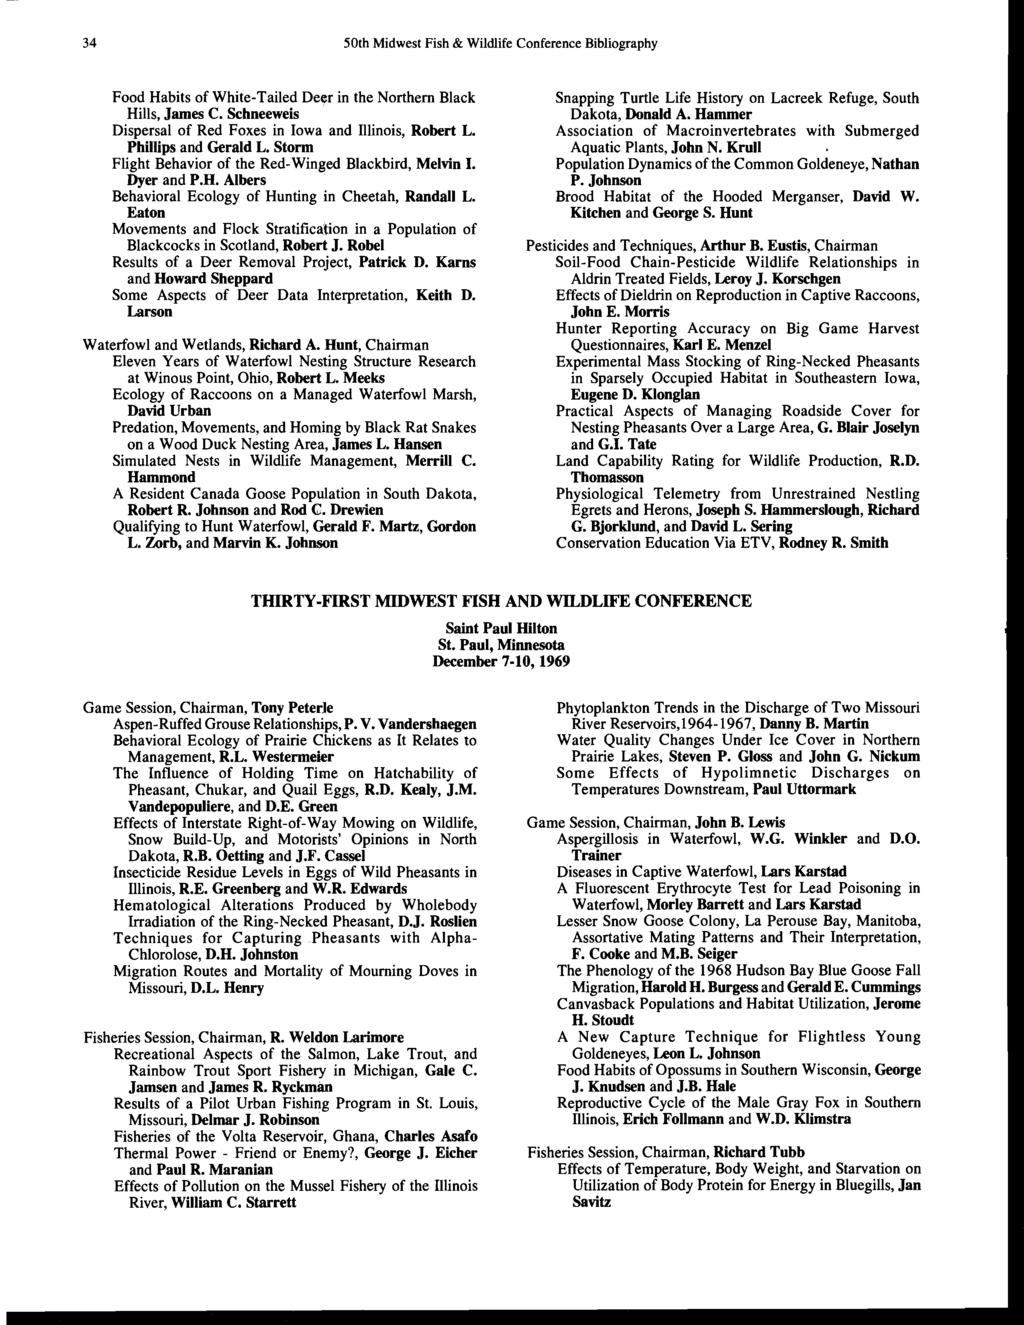 34 50th Midwest Fish & Wildlife Conference Bibliography Food Habits of White-Tailed Deer in the Northern Black Hills, James C. Schneeweis Dispersal of Red Foxes in Iowa and Illinois, Robert L.